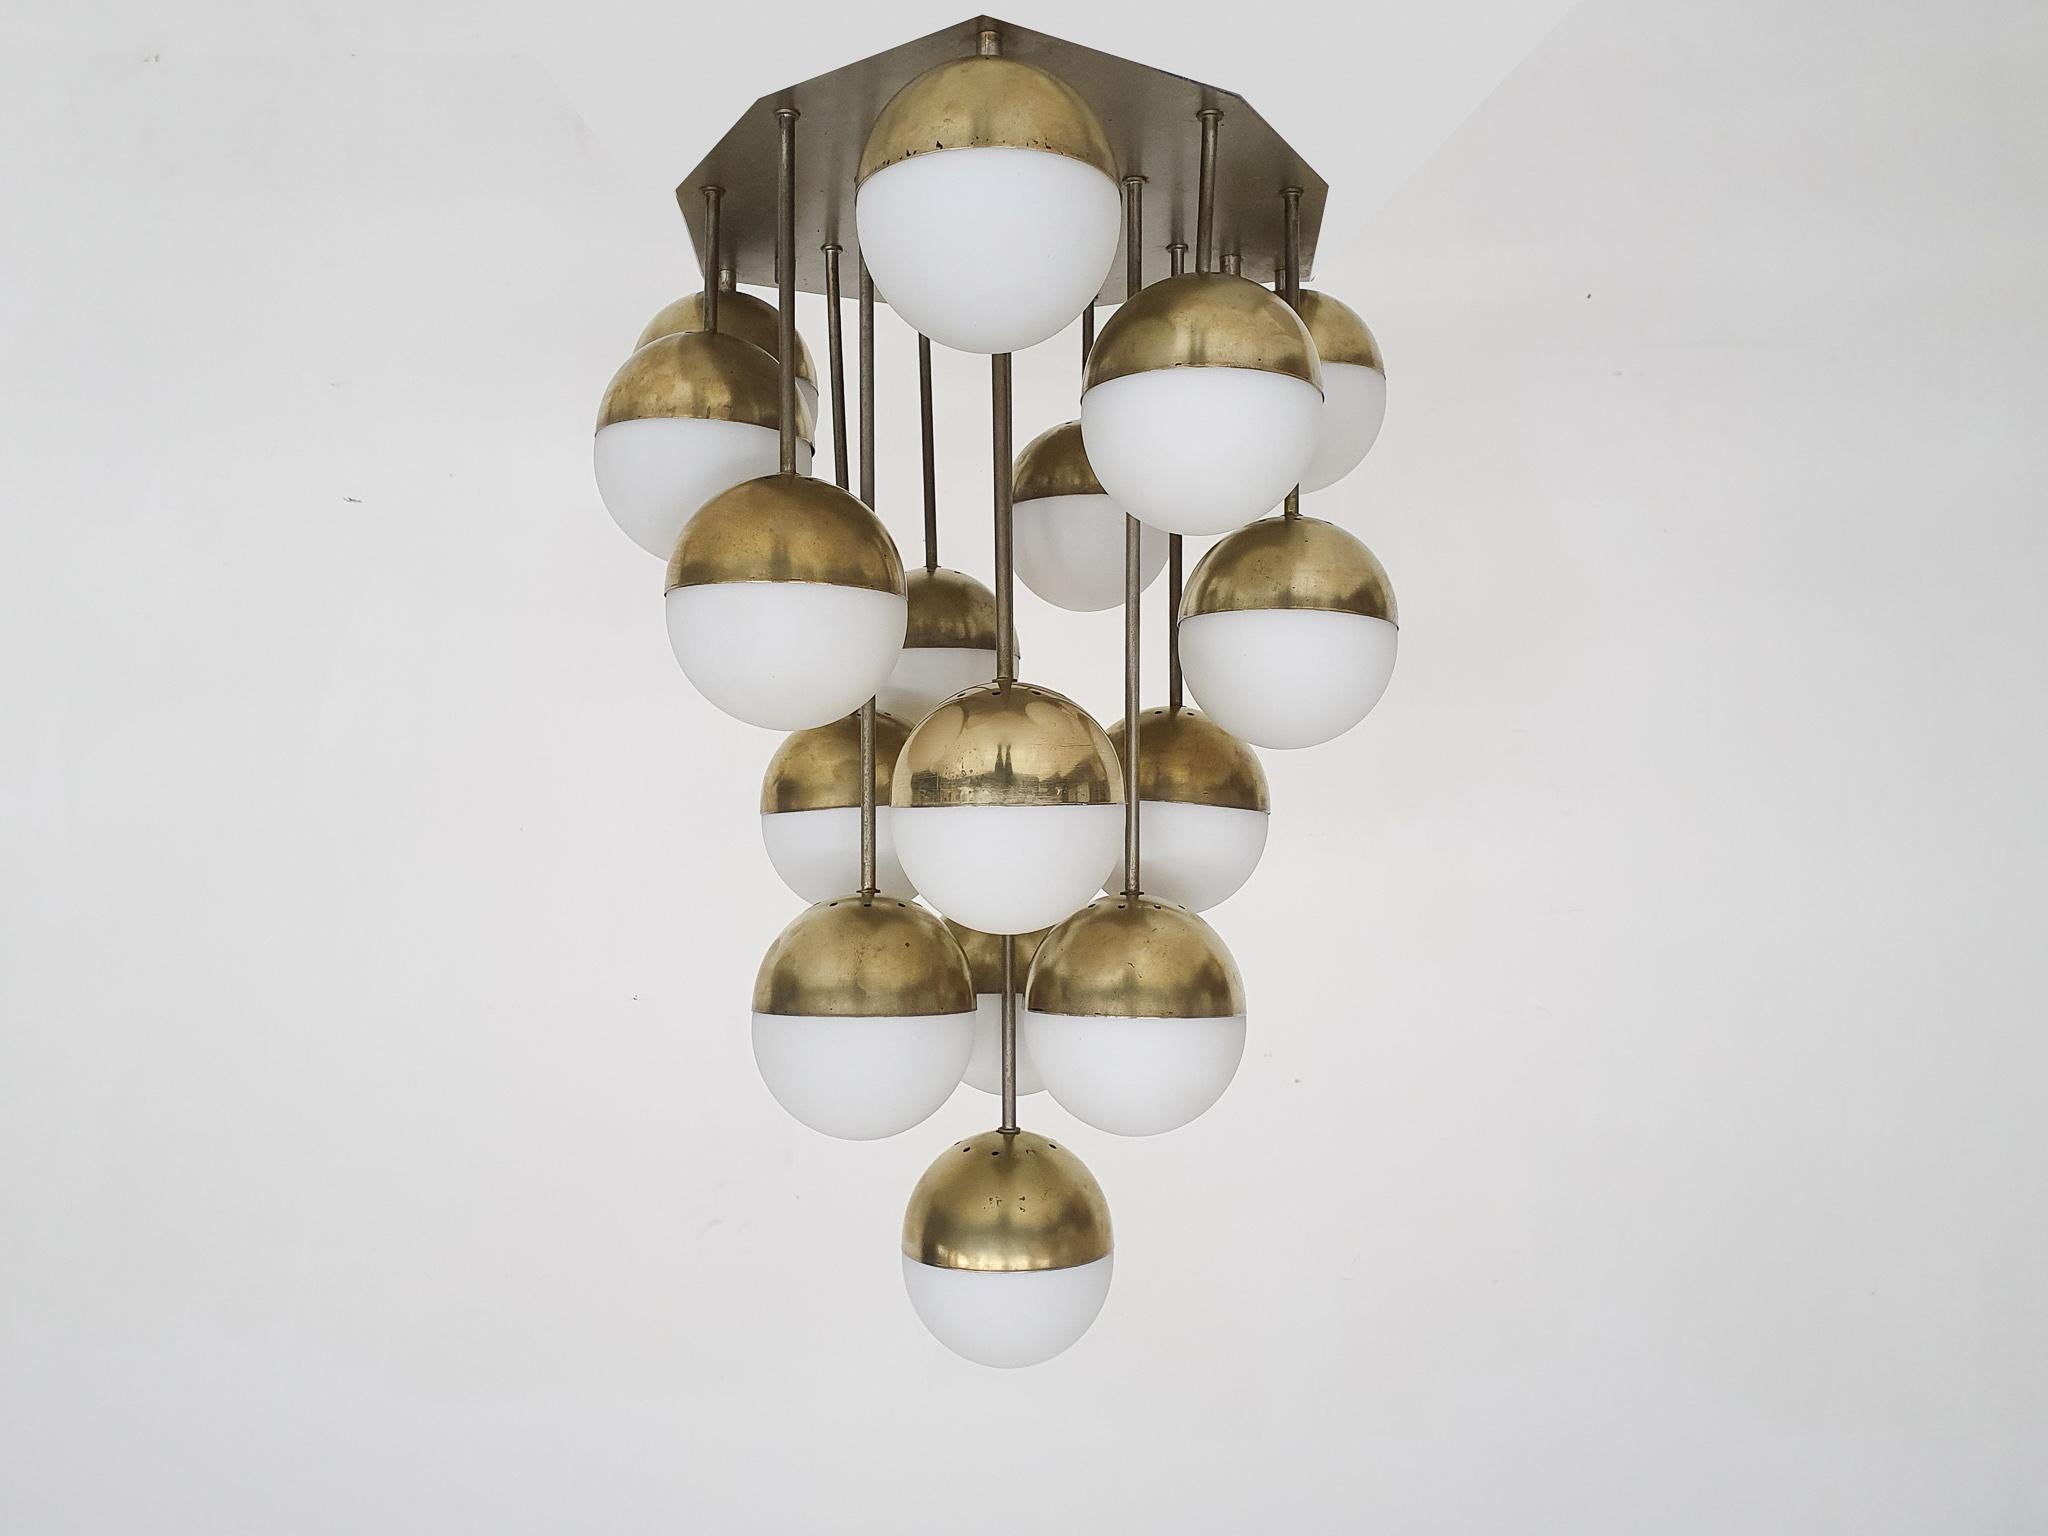 Large impressive chandelier by Stilnovo, Italy 1960's

The lamp consist of a metal ceiling plate with 16 brass and opaline glass globes.
We have checked the lamp and renewed all the fittings, the wires were already replaced once.
The brass globes